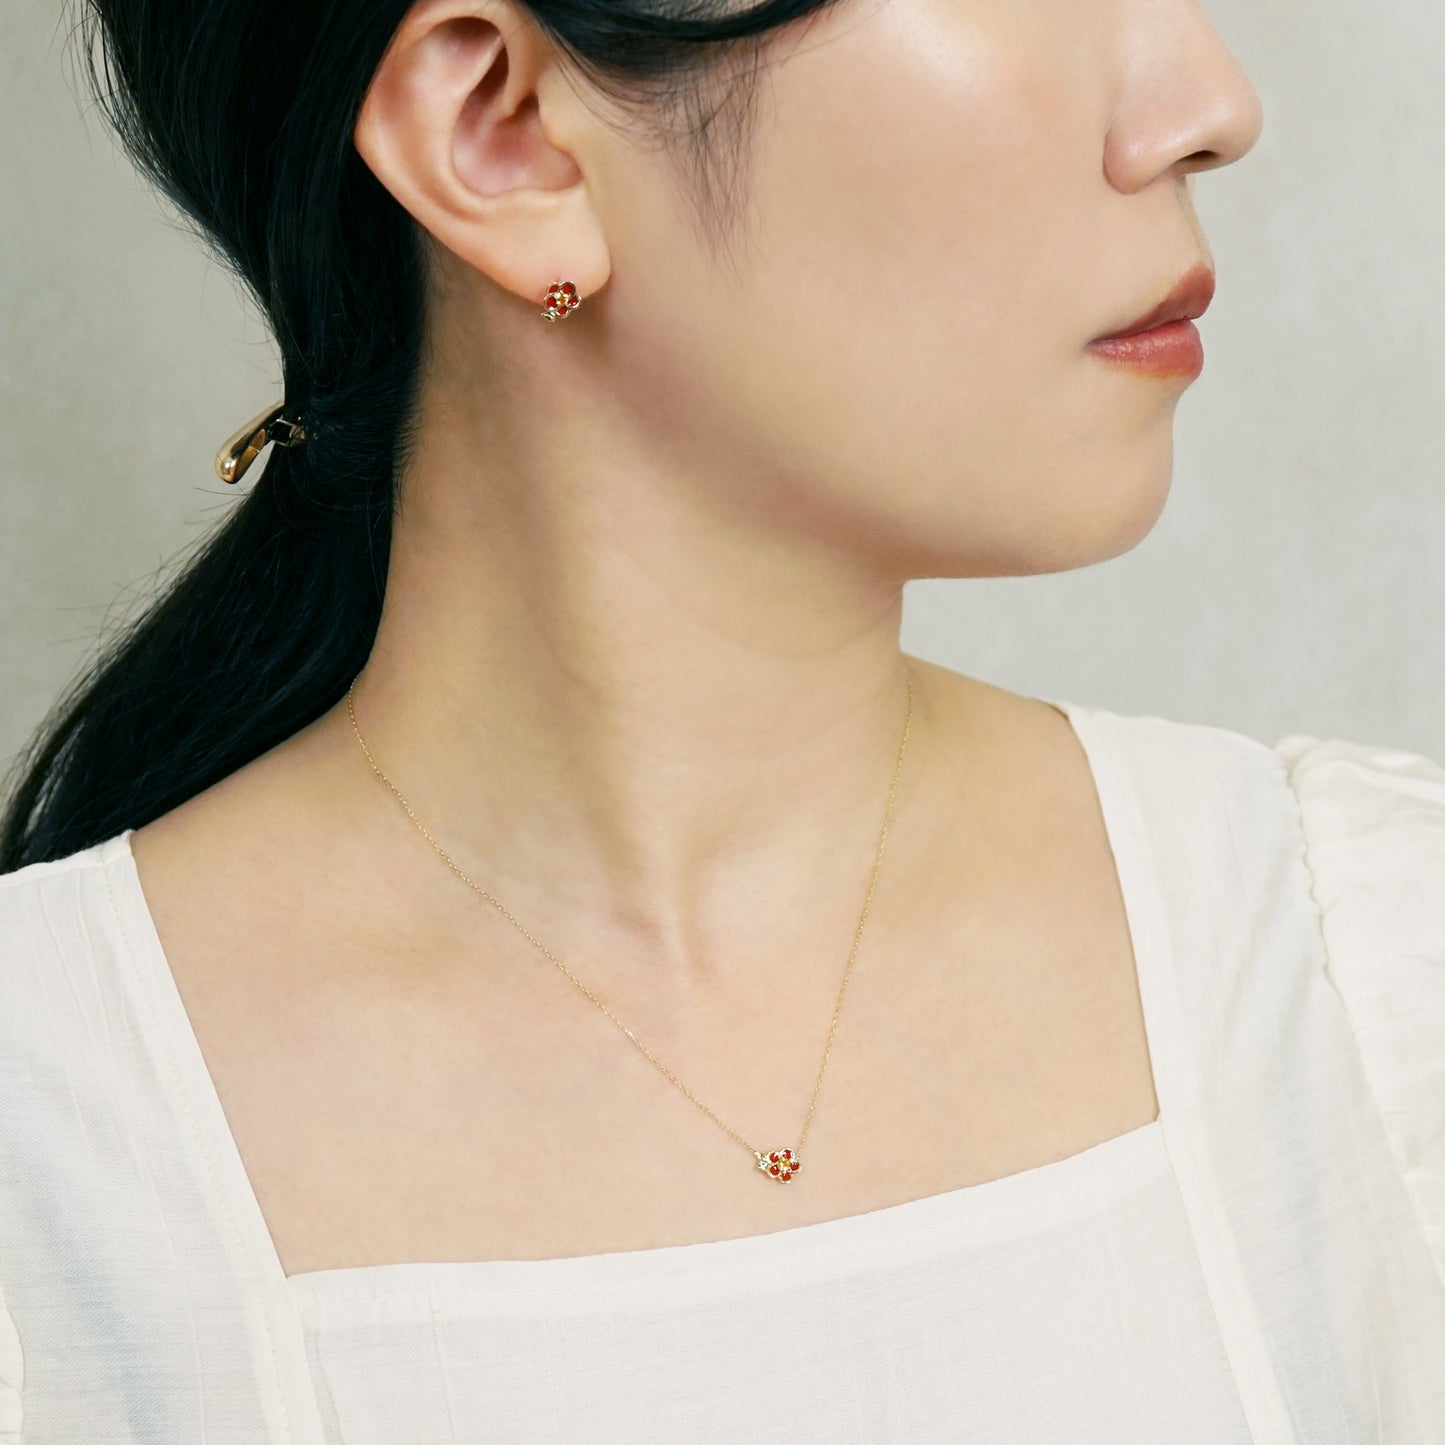 [Birth Flower Jewelry] November - Camellia Necklace (10K Yellow Gold) - Model Image